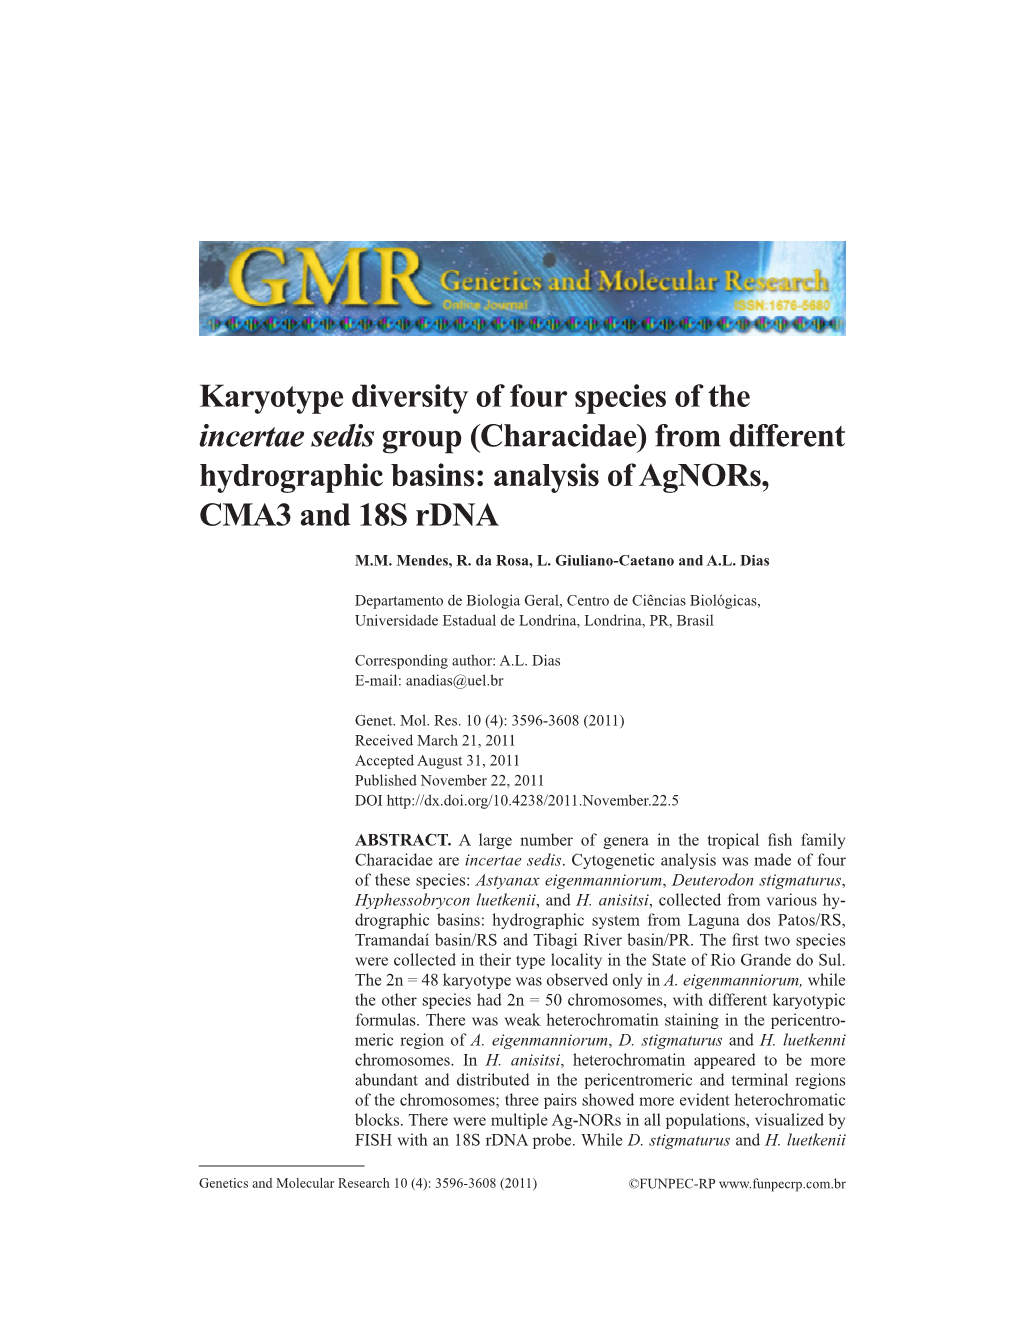 Characidae) from Different Hydrographic Basins: Analysis of Agnors, CMA3 and 18S Rdna